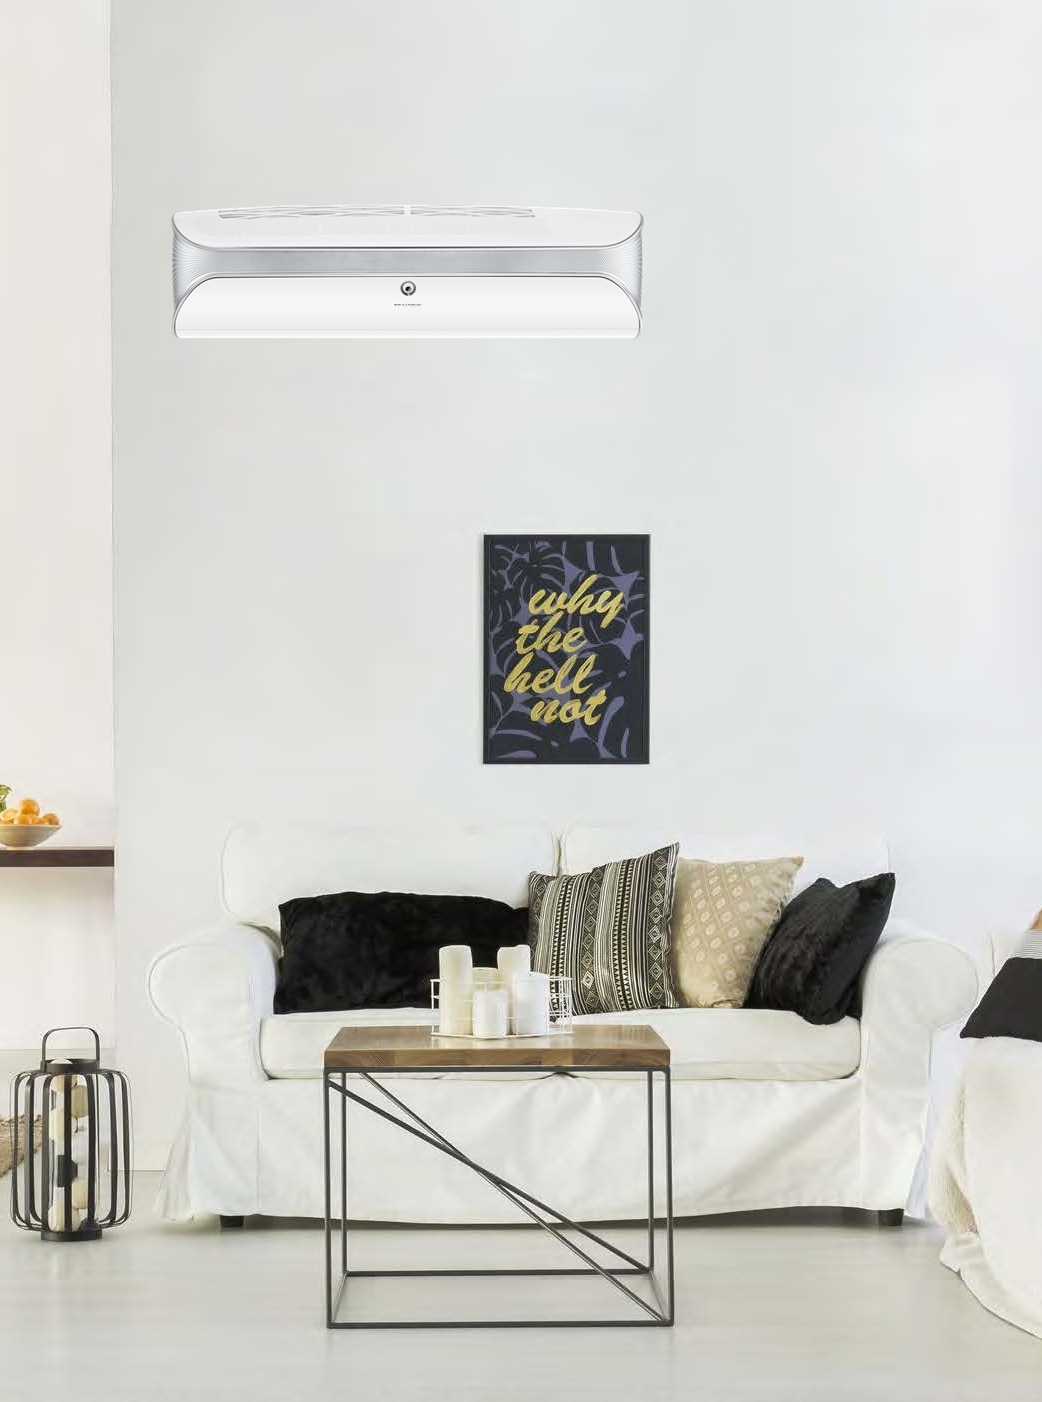 Gree Soyal Wall Mounted Split Air Conditioner Germany Gree